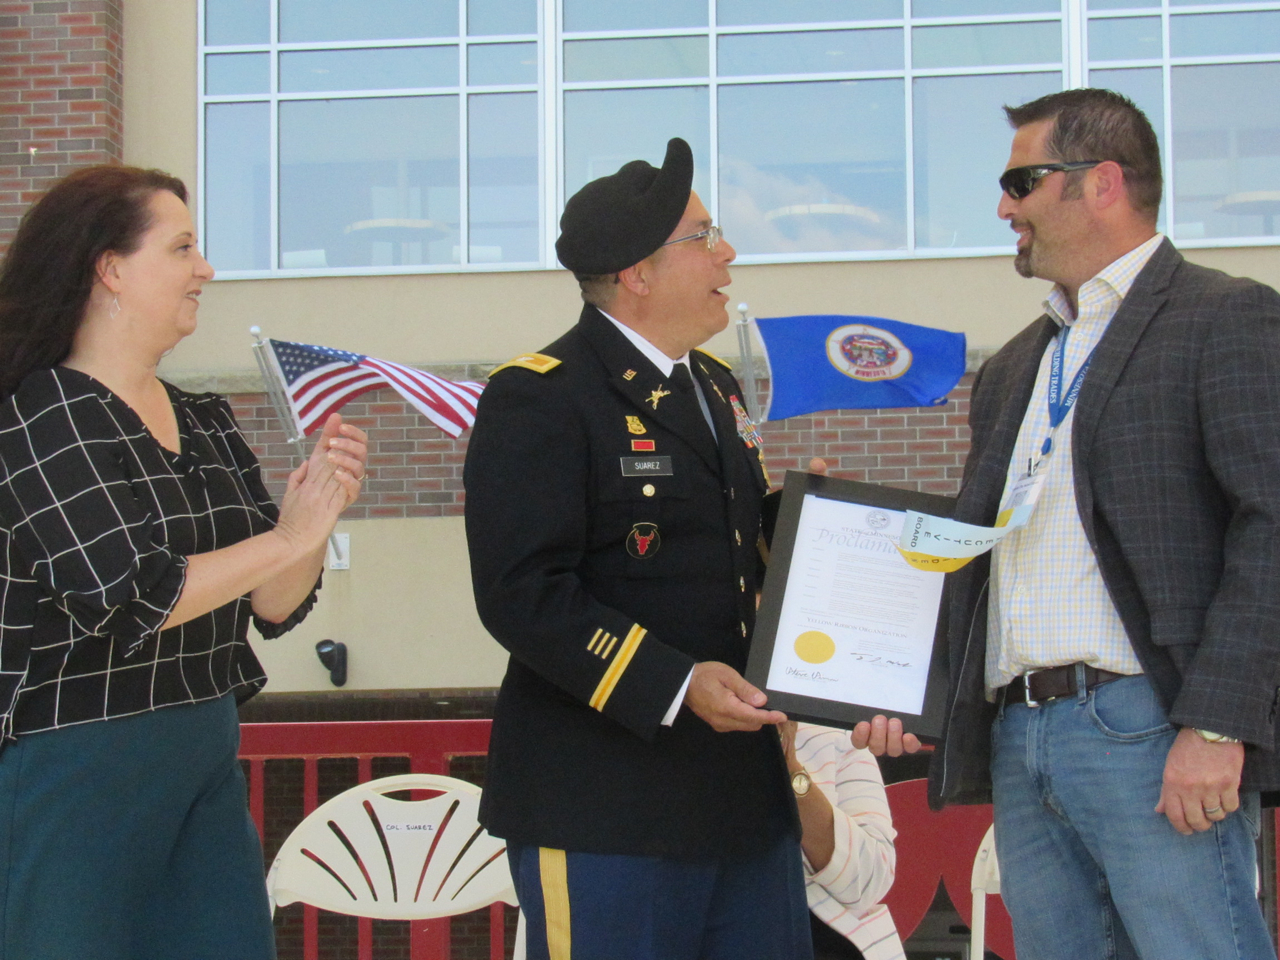 a man in a decorated military outfit with a beret stands between a woman with a US flag in her hand and a man with a blazer on, holding a white paper plaque